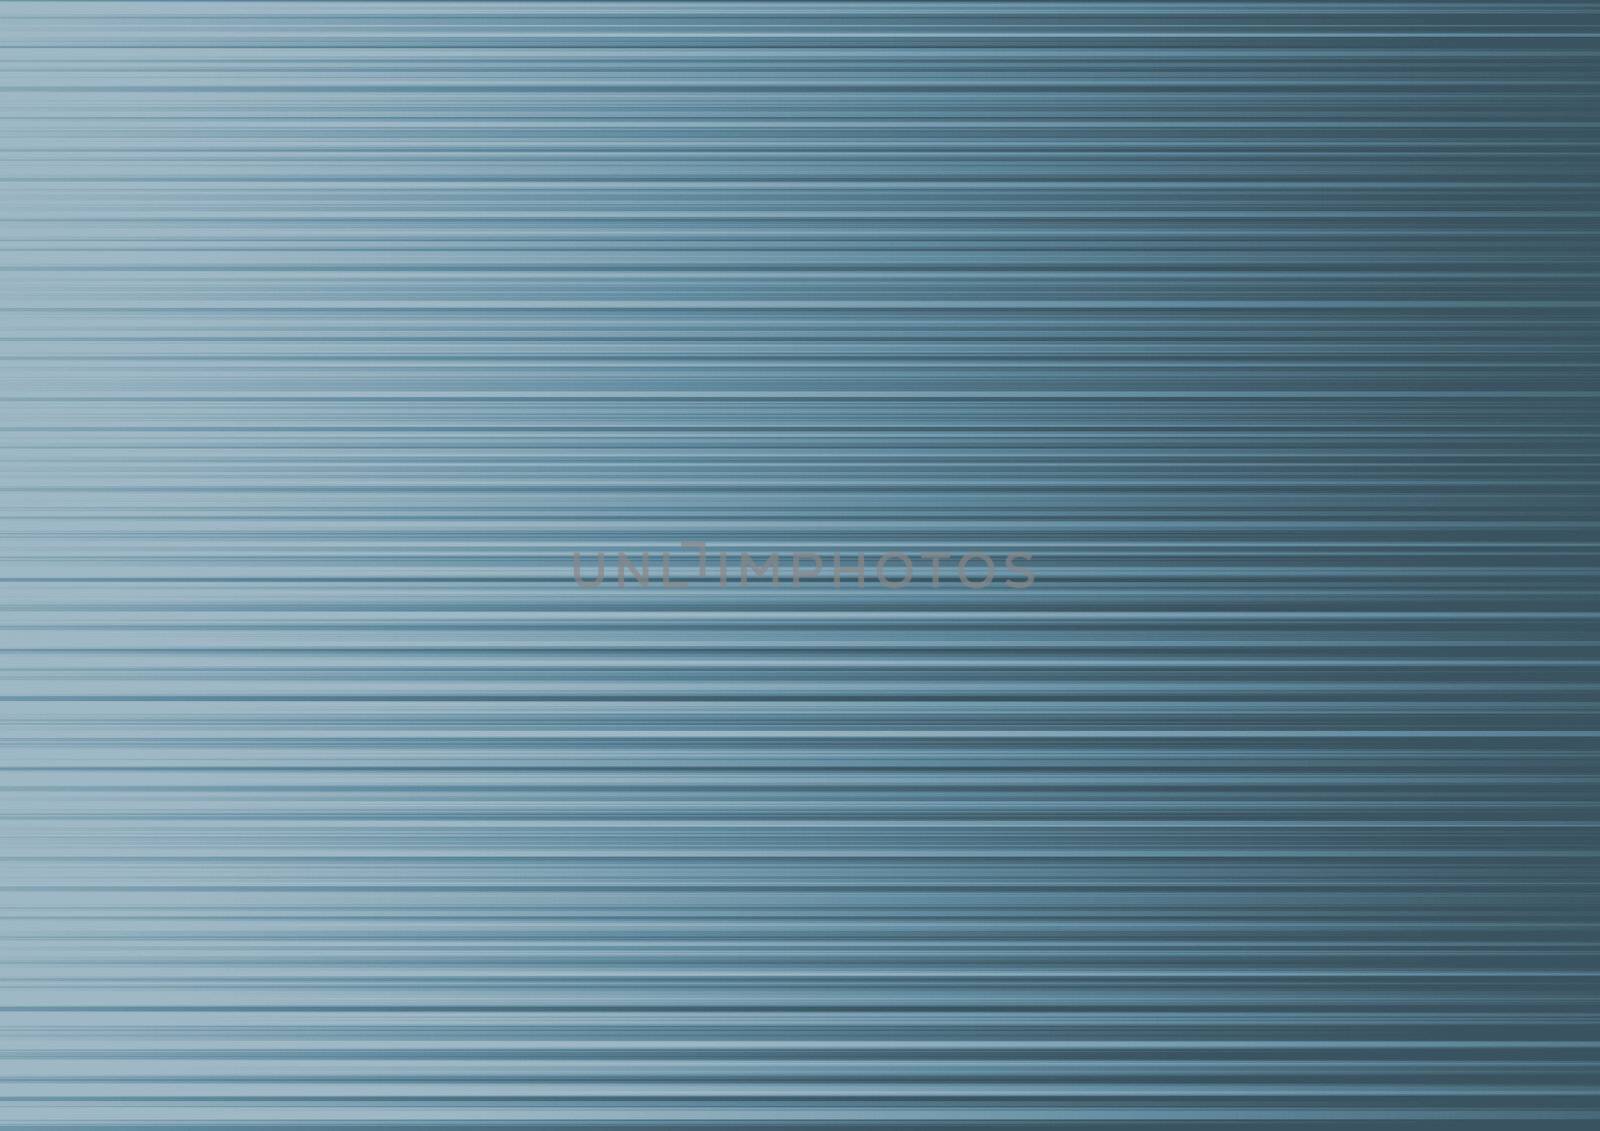 Abstract blue background by richter1910